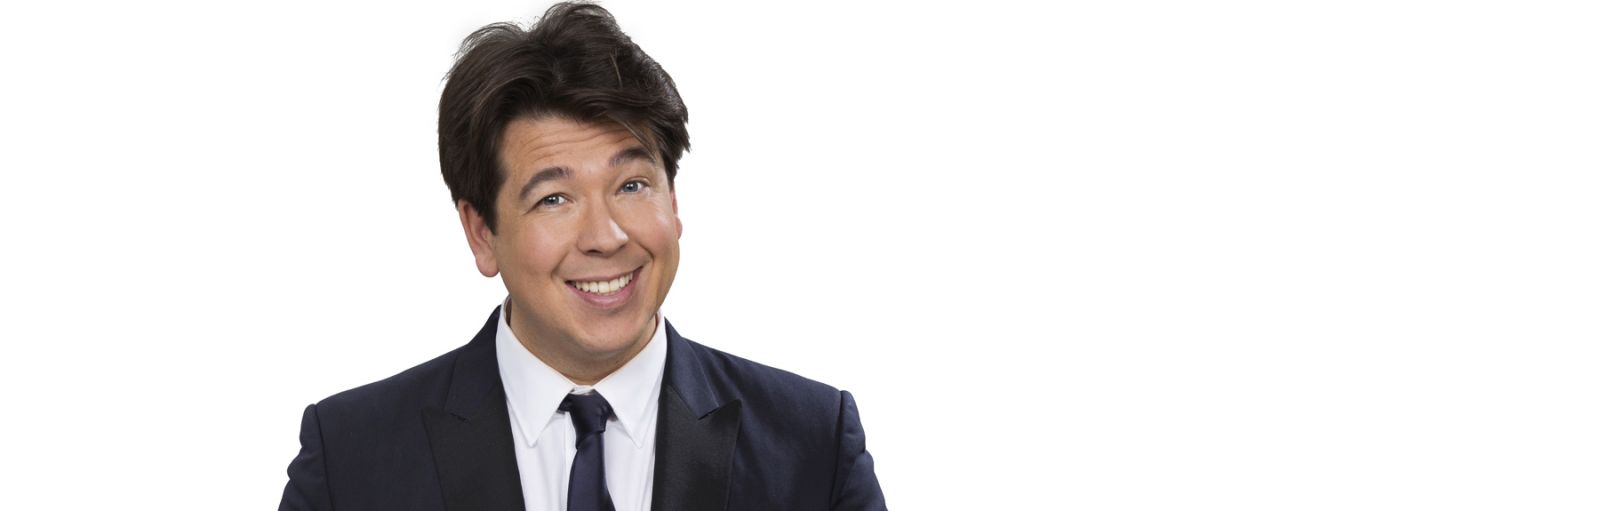 Michael McIntyre at The Colston Hall 25/26 August 2017